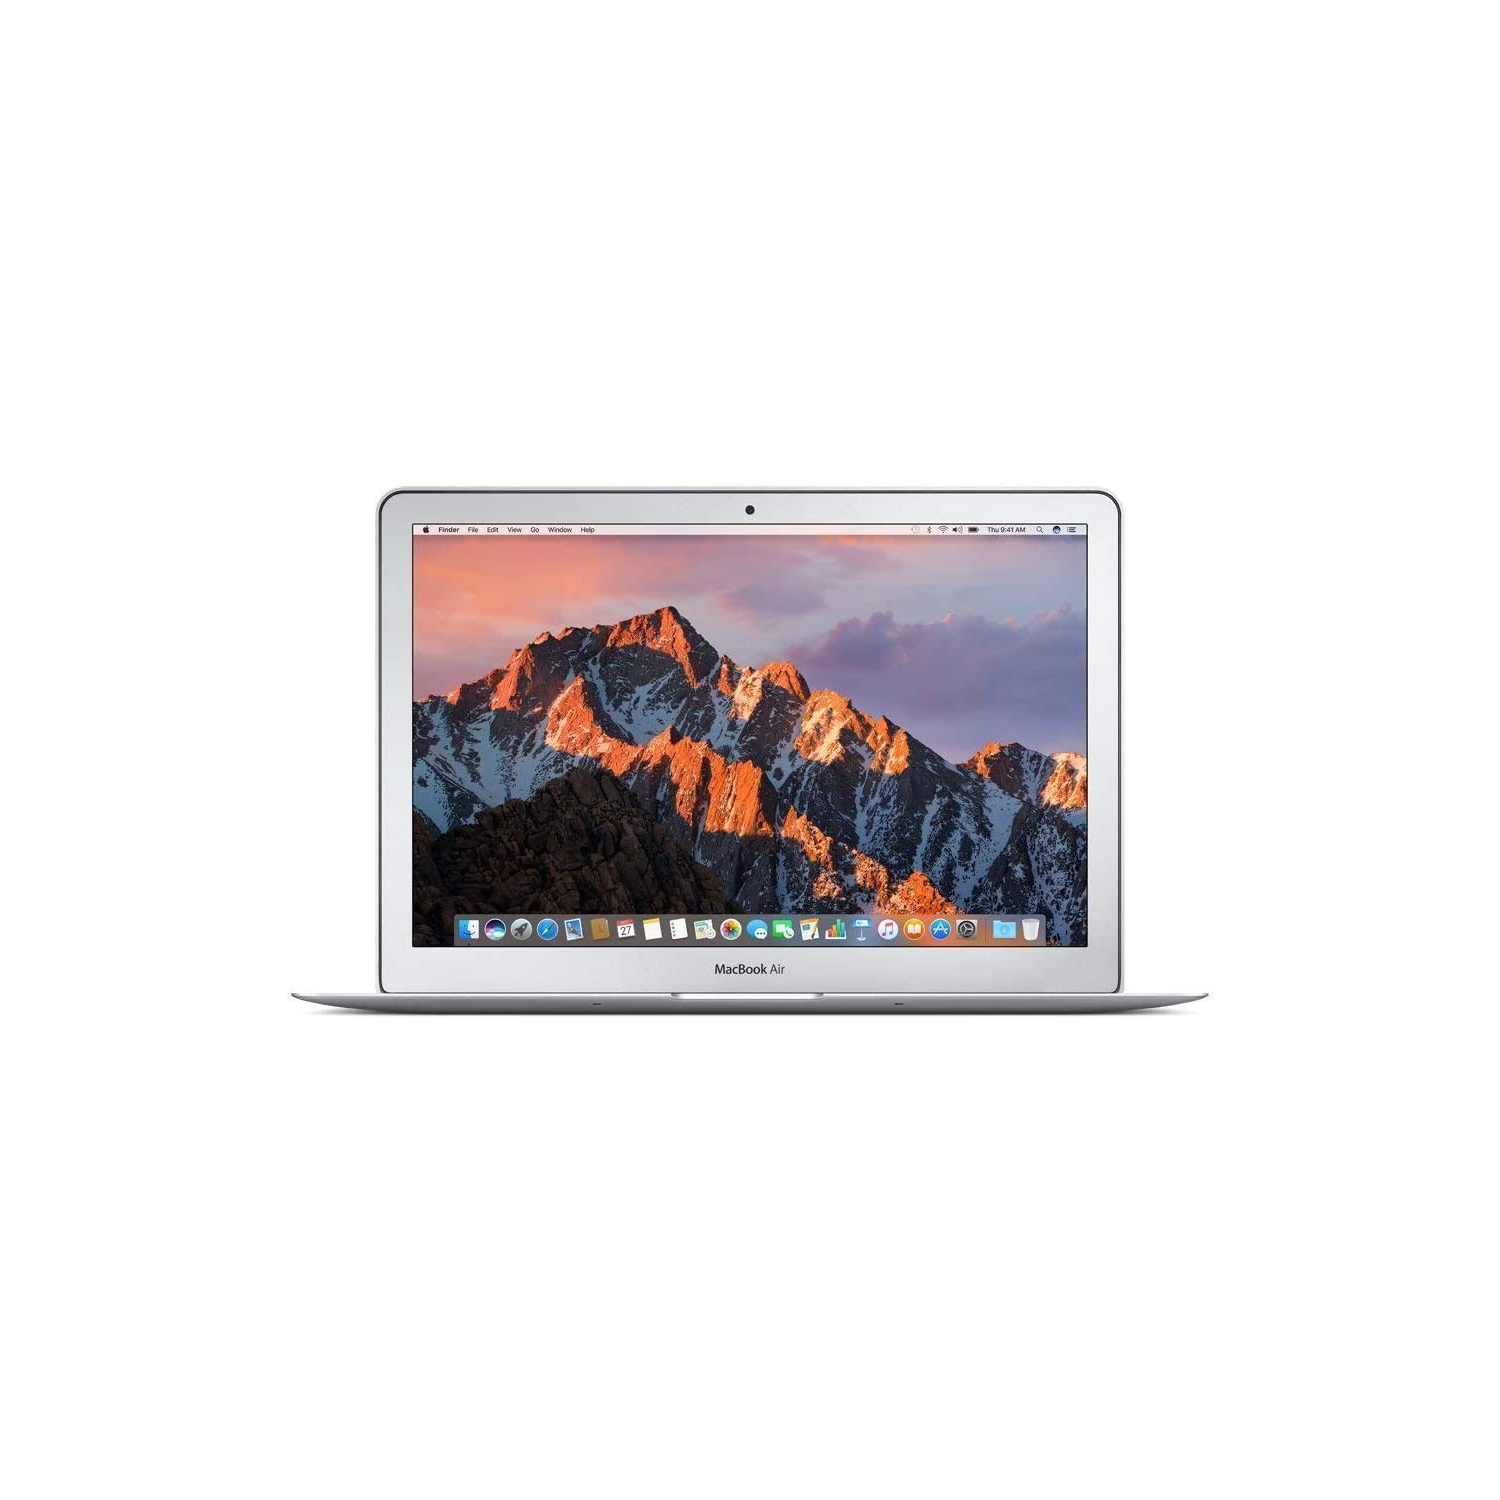 Refurbished (Good) - Apple MacBook Air 13" (2017) - Silver (Intel Core i5 1.8GHz / 256GB SSD / 8GB RAM) - Certified 9/10 Condition